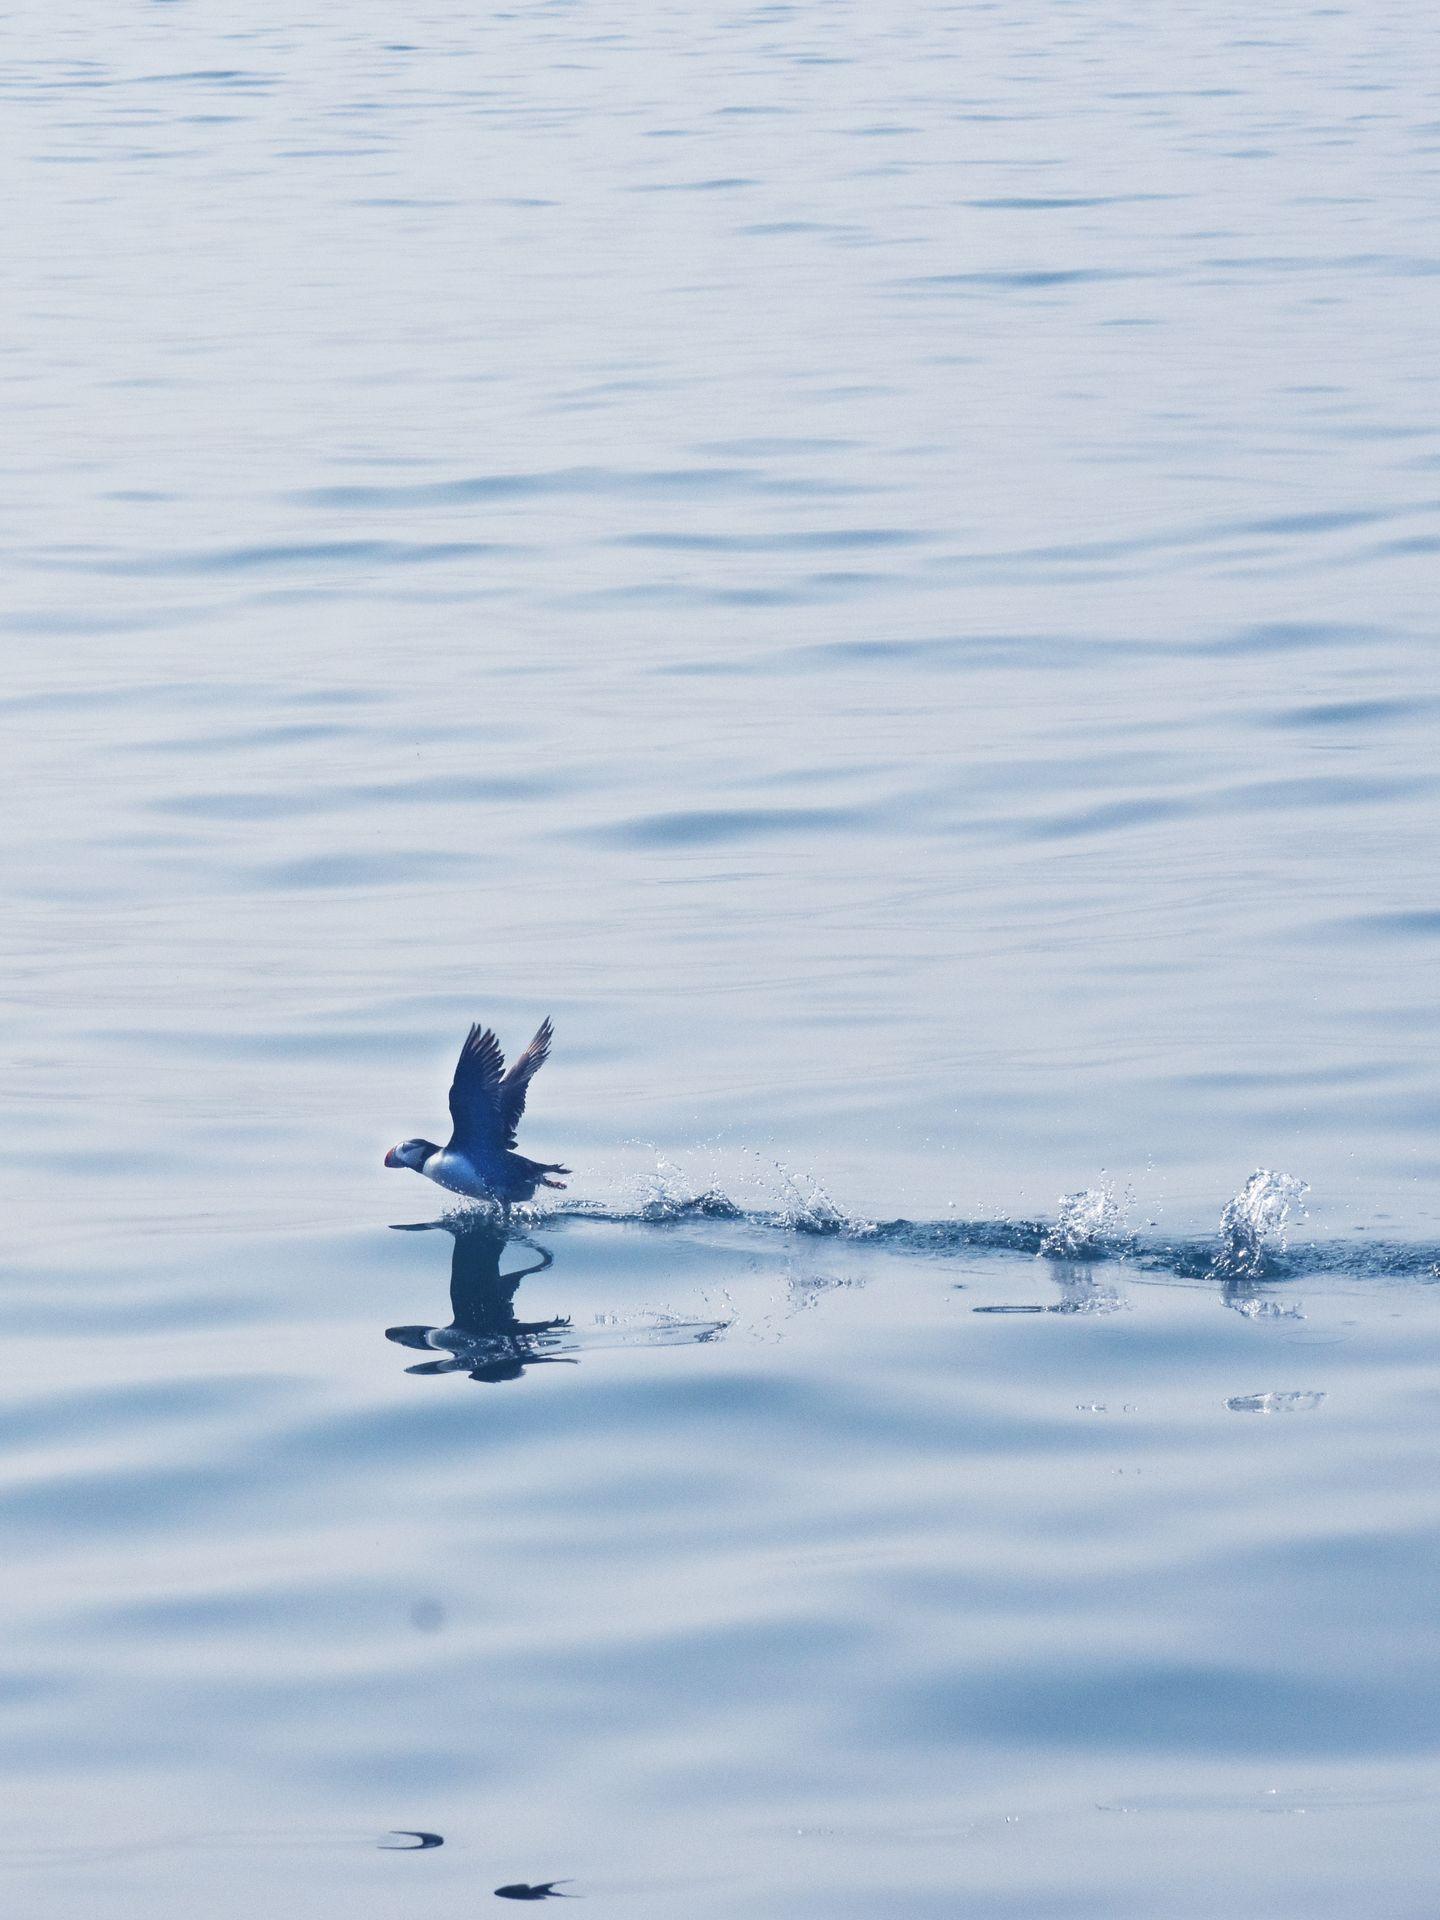 A puffin flying along the water in Kenai Fjords.